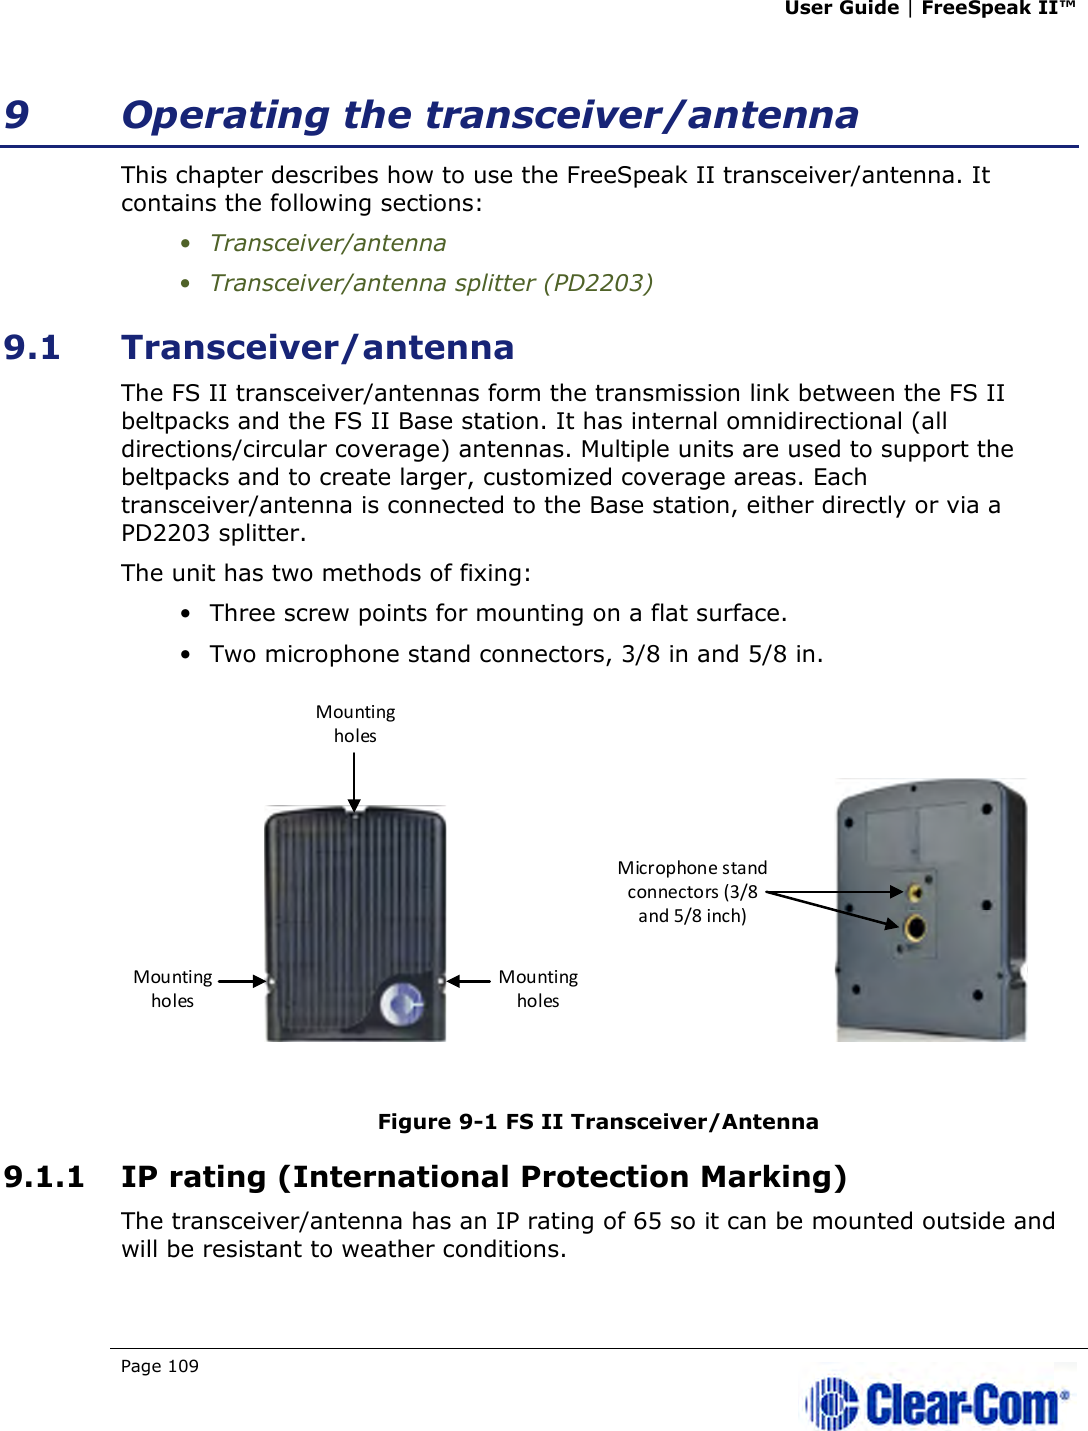 User Guide | FreeSpeak II™  Page 109   9 Operating the transceiver/antenna This chapter describes how to use the FreeSpeak II transceiver/antenna. It contains the following sections: • Transceiver/antenna • Transceiver/antenna splitter (PD2203) 9.1 Transceiver/antenna The FS II transceiver/antennas form the transmission link between the FS II beltpacks and the FS II Base station. It has internal omnidirectional (all directions/circular coverage) antennas. Multiple units are used to support the beltpacks and to create larger, customized coverage areas. Each transceiver/antenna is connected to the Base station, either directly or via a PD2203 splitter. The unit has two methods of fixing: • Three screw points for mounting on a flat surface. • Two microphone stand connectors, 3/8 in and 5/8 in.   Figure 9-1 FS II Transceiver/Antenna 9.1.1 IP rating (International Protection Marking) The transceiver/antenna has an IP rating of 65 so it can be mounted outside and will be resistant to weather conditions.  Mounting holesMounting holesMounting holesMicrophone stand connectors (3/8 and 5/8 inch)